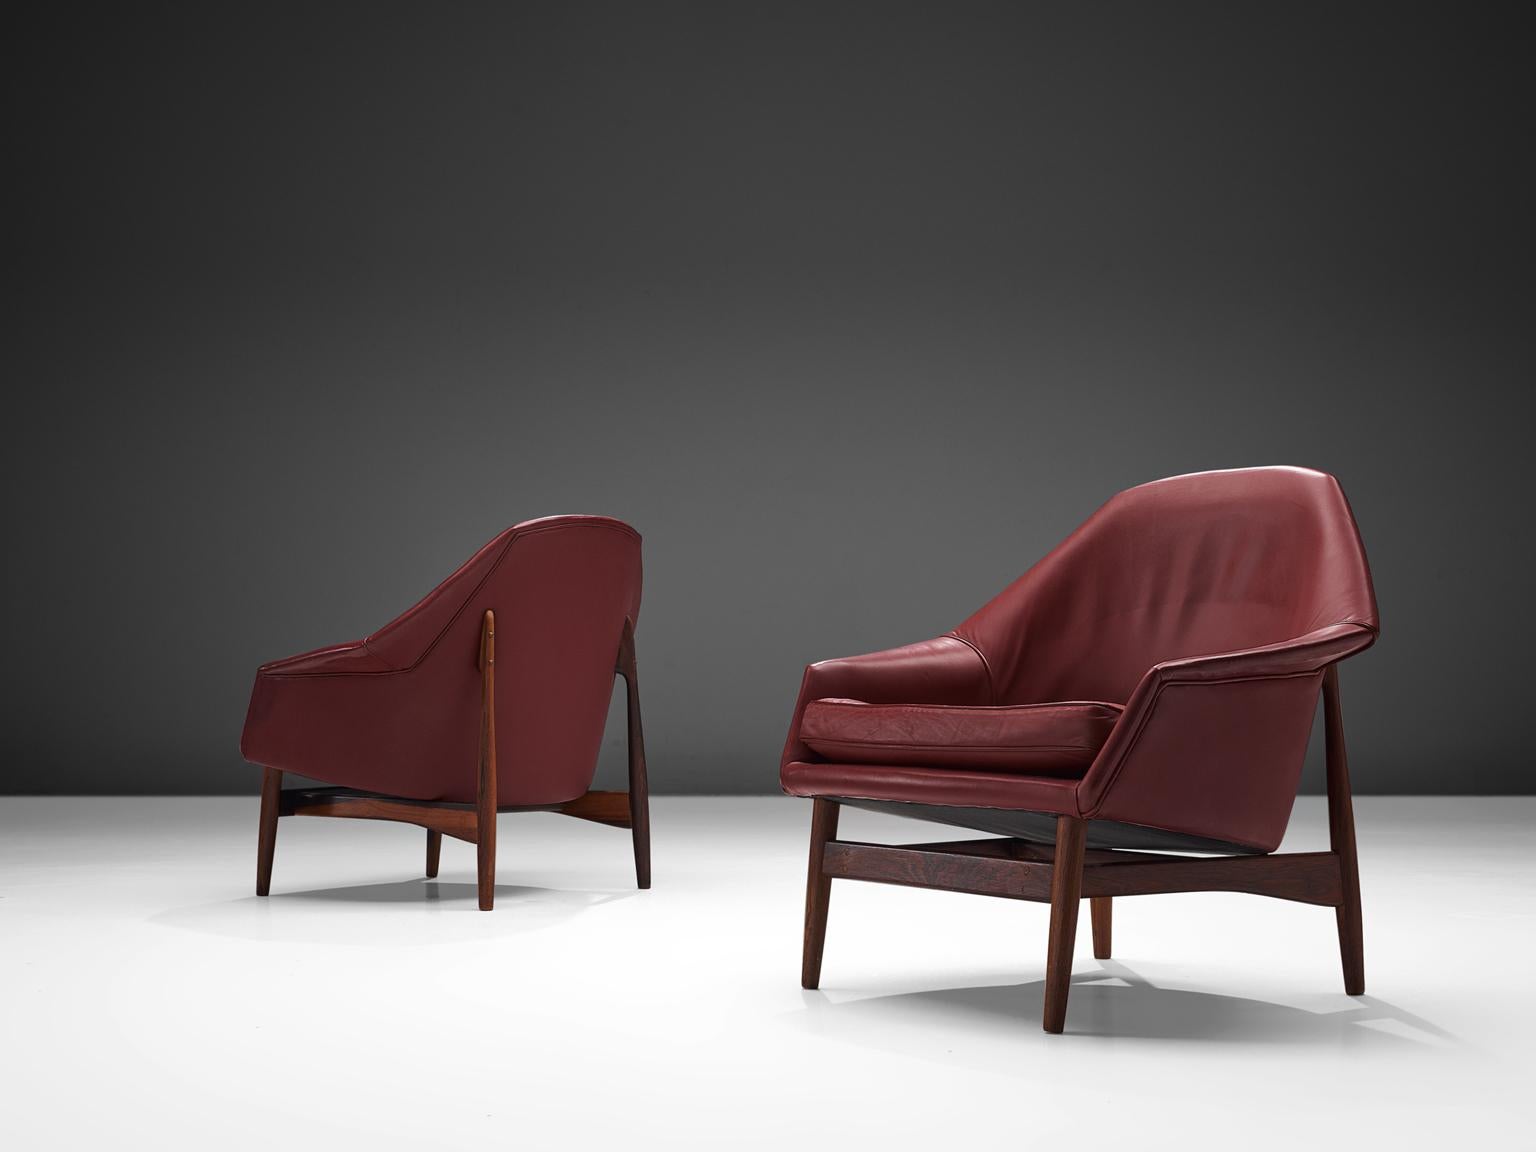 Ib Kofod-Larsen, armchairs, red leather and rosewood, Denmark, circa 1957

This set of comfortable elegant chairs is design by Ib Kofod-Larsen for Carlo Gahrm. The pieces feature the typical frame that we are used to by Ib Kofod-Larsen with rounded,